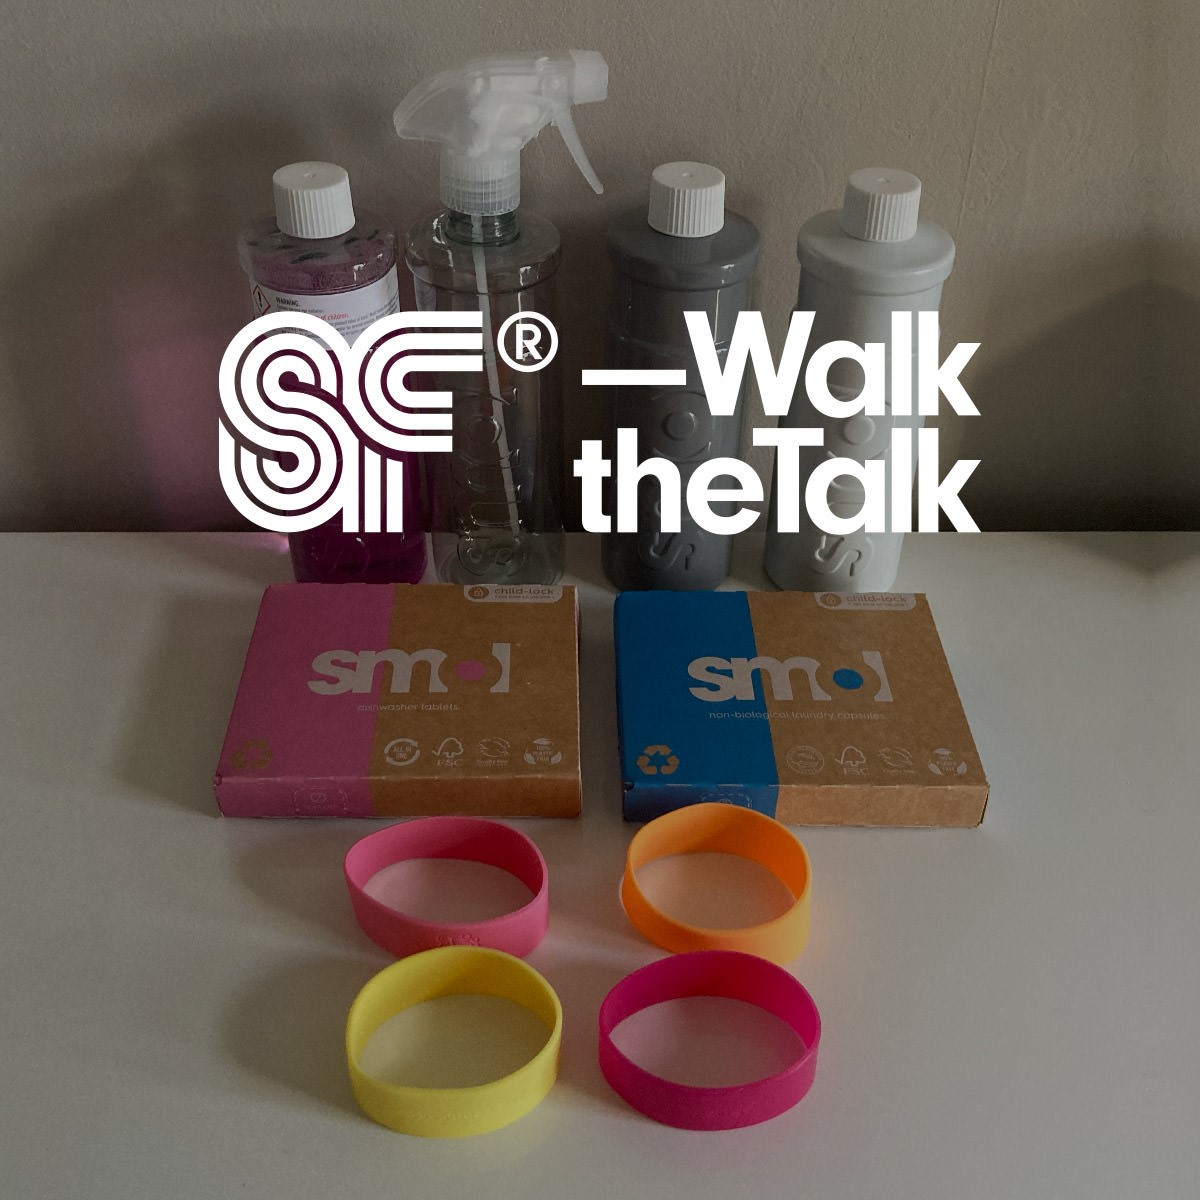 Superfried – Walk the Talk logo. Eco friendly product bundle by smol. Considering purchases to reduce my environmental impact.